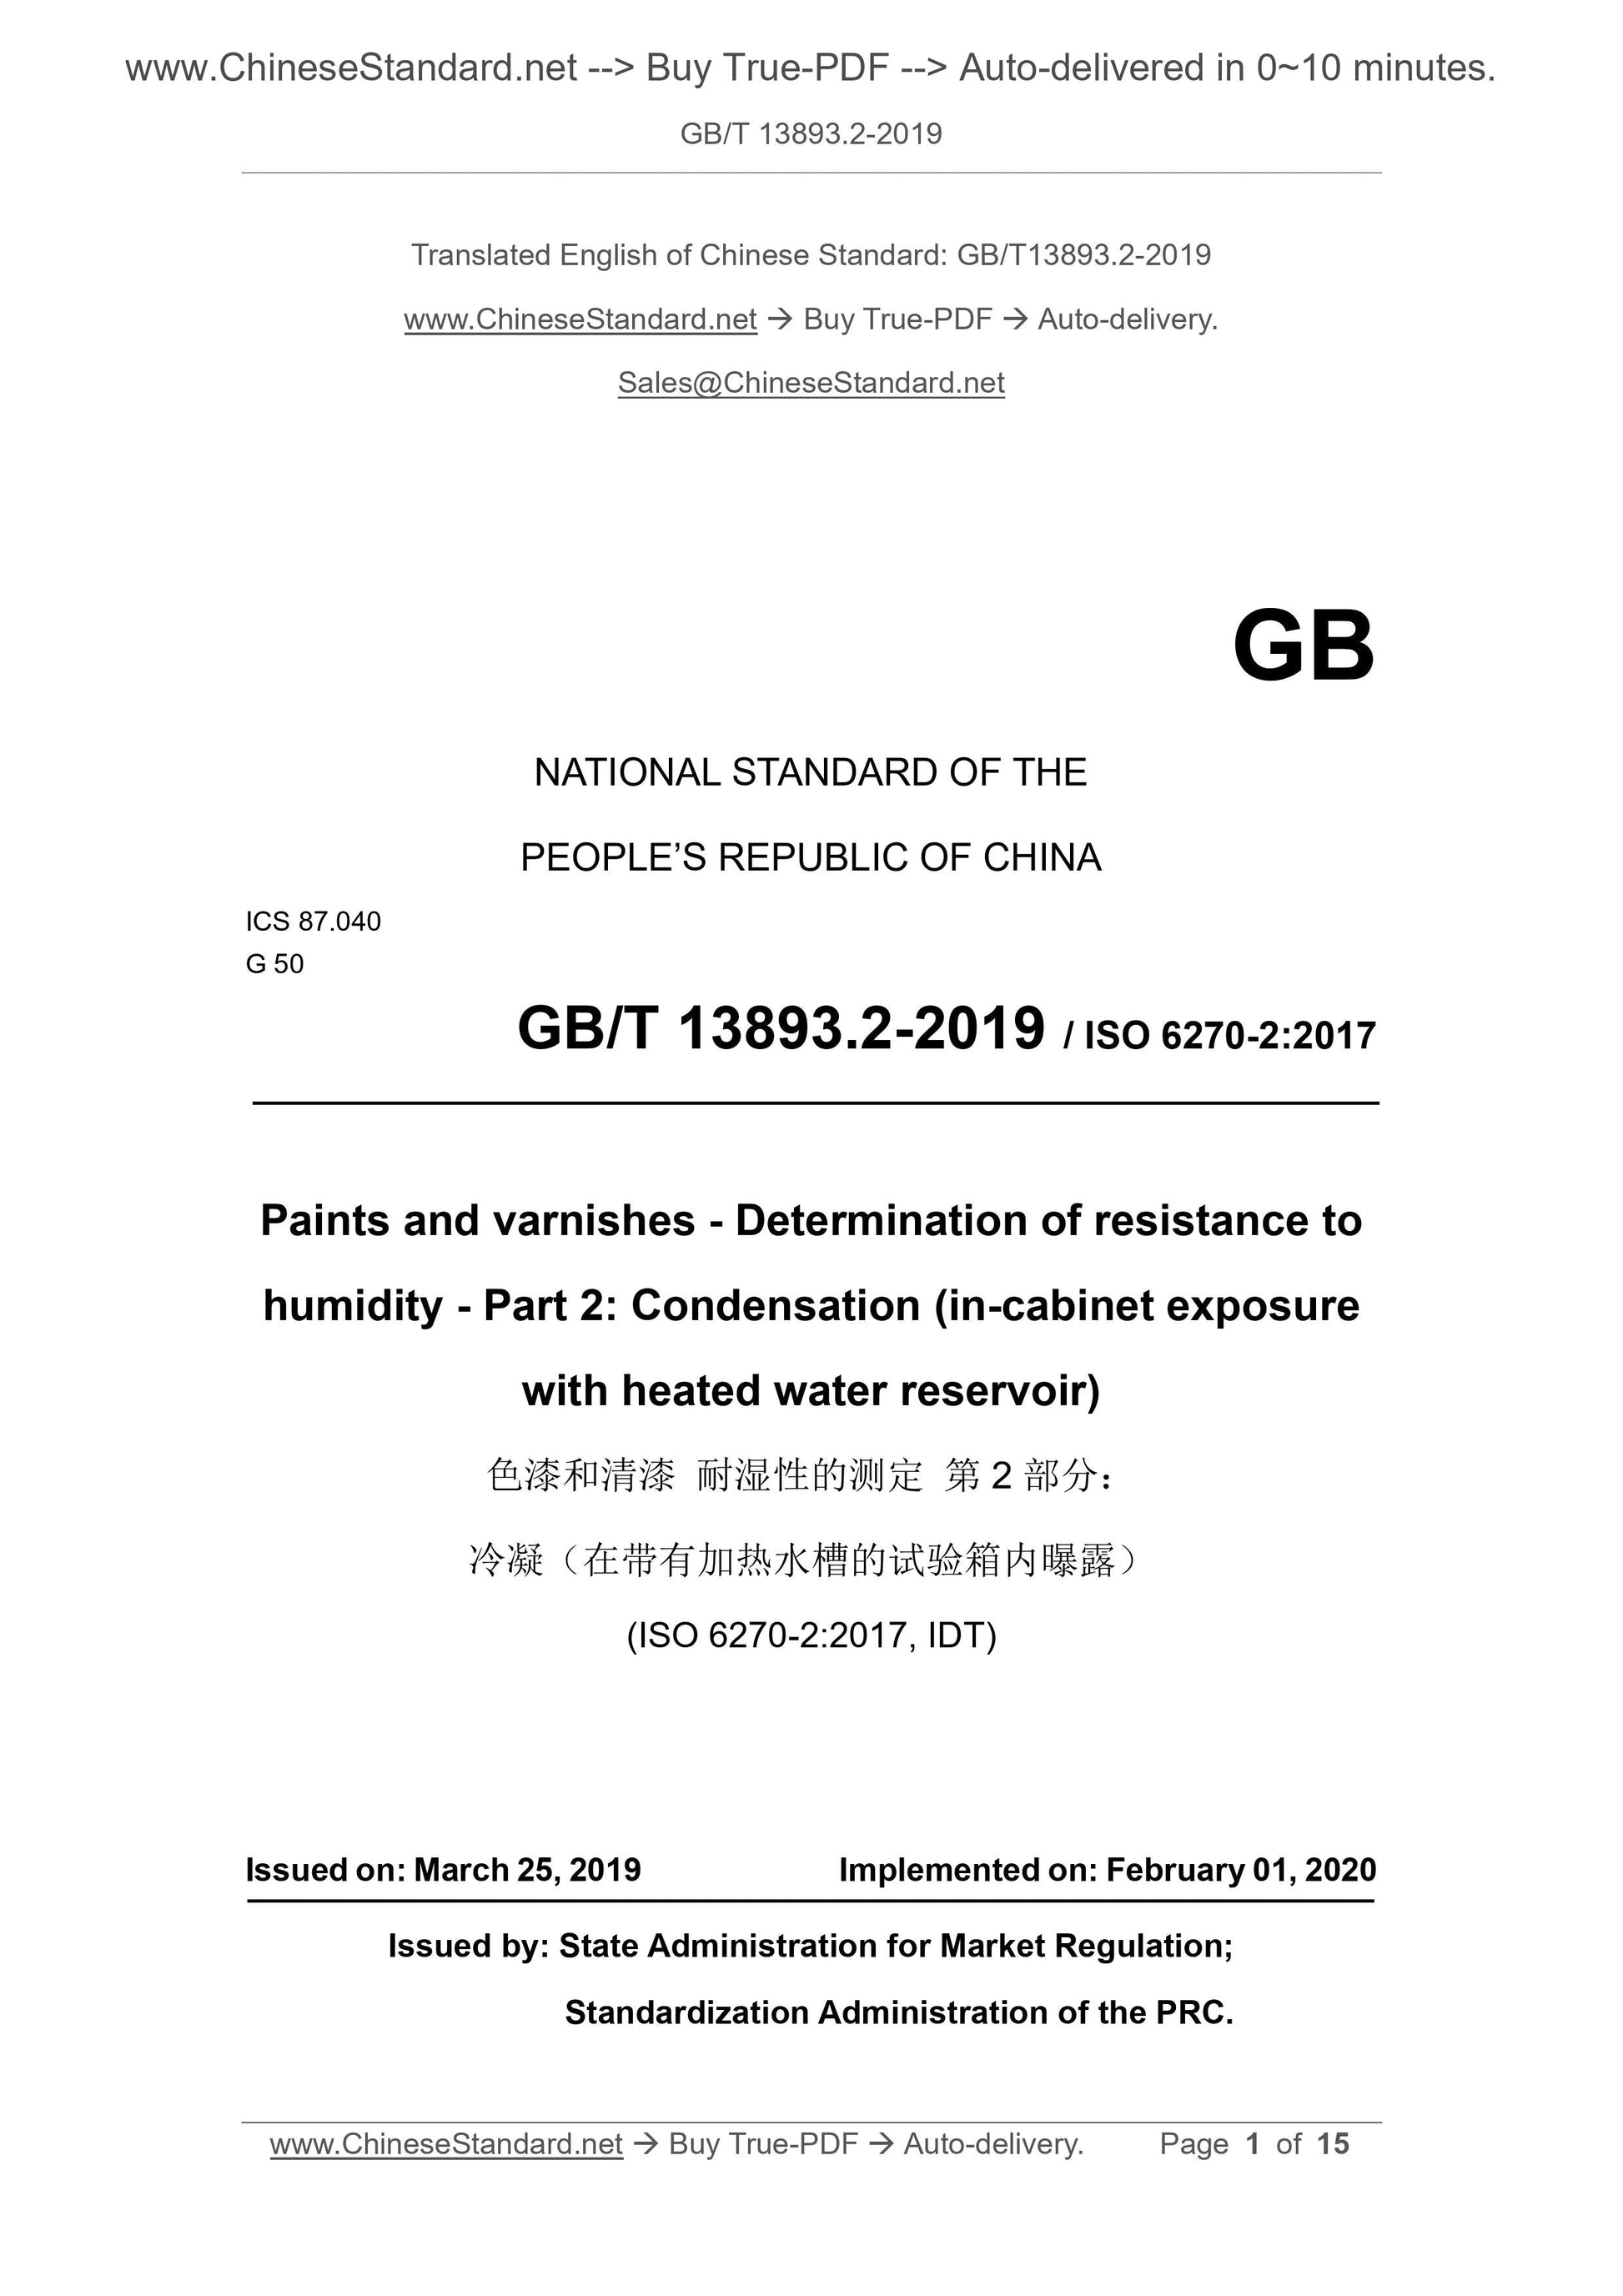 GB/T 13893.2-2019 Page 1